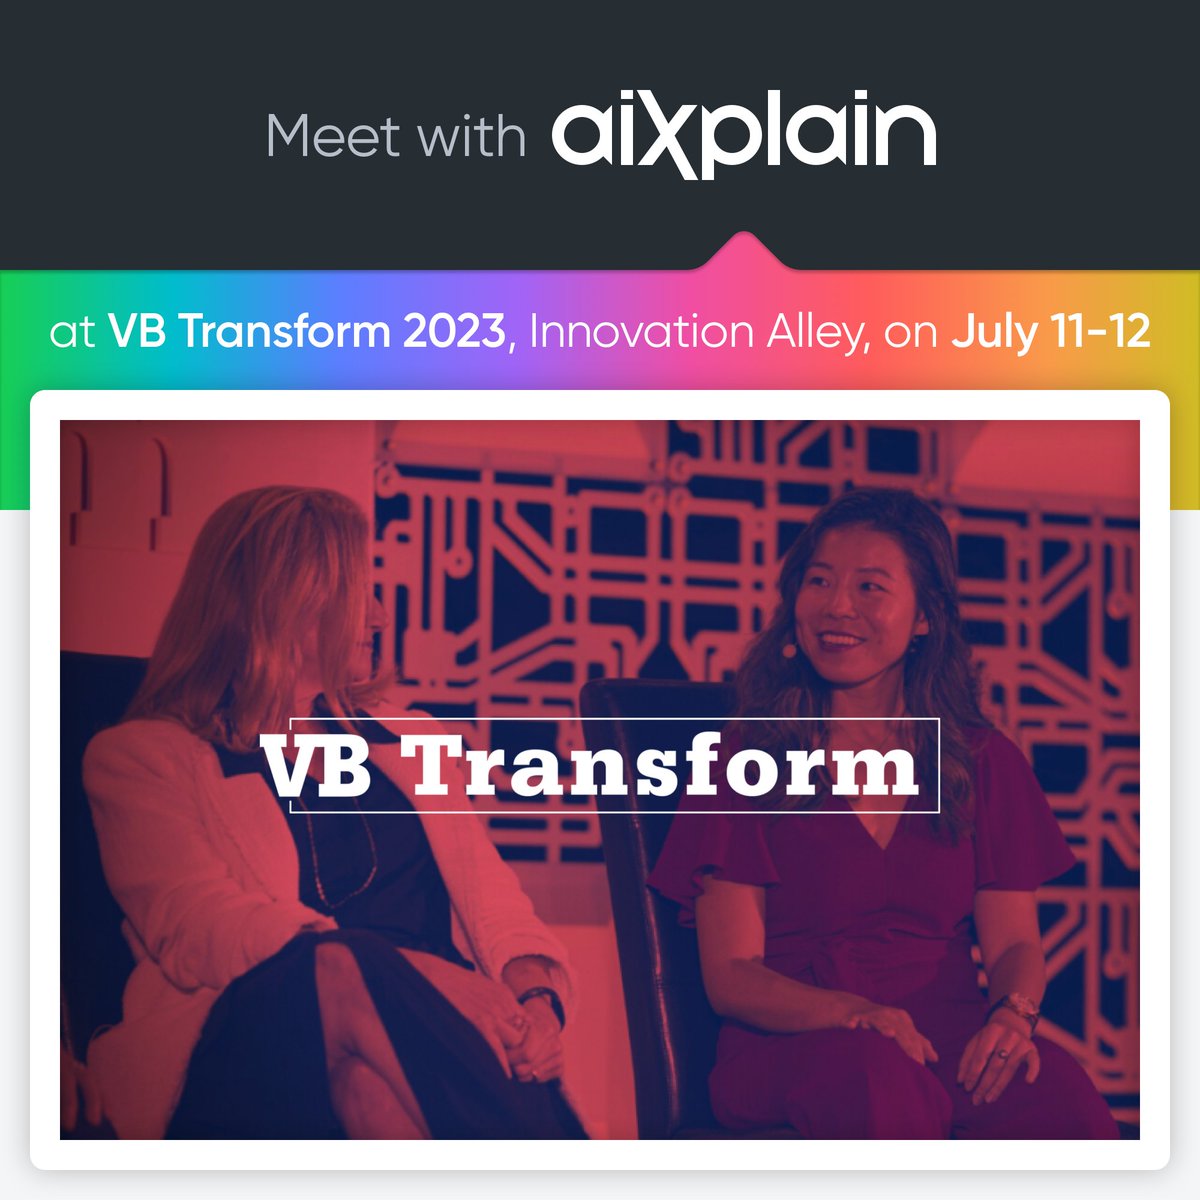 Join us tomorrow at #VBTransform! Come by our booth in the Innovation Alley where you can meet our CEO, @Hassan_Sawaf, and some of our team members. Explore how aiXplain can streamline your workflows and help you launch your application with the latest AI assets and tools.